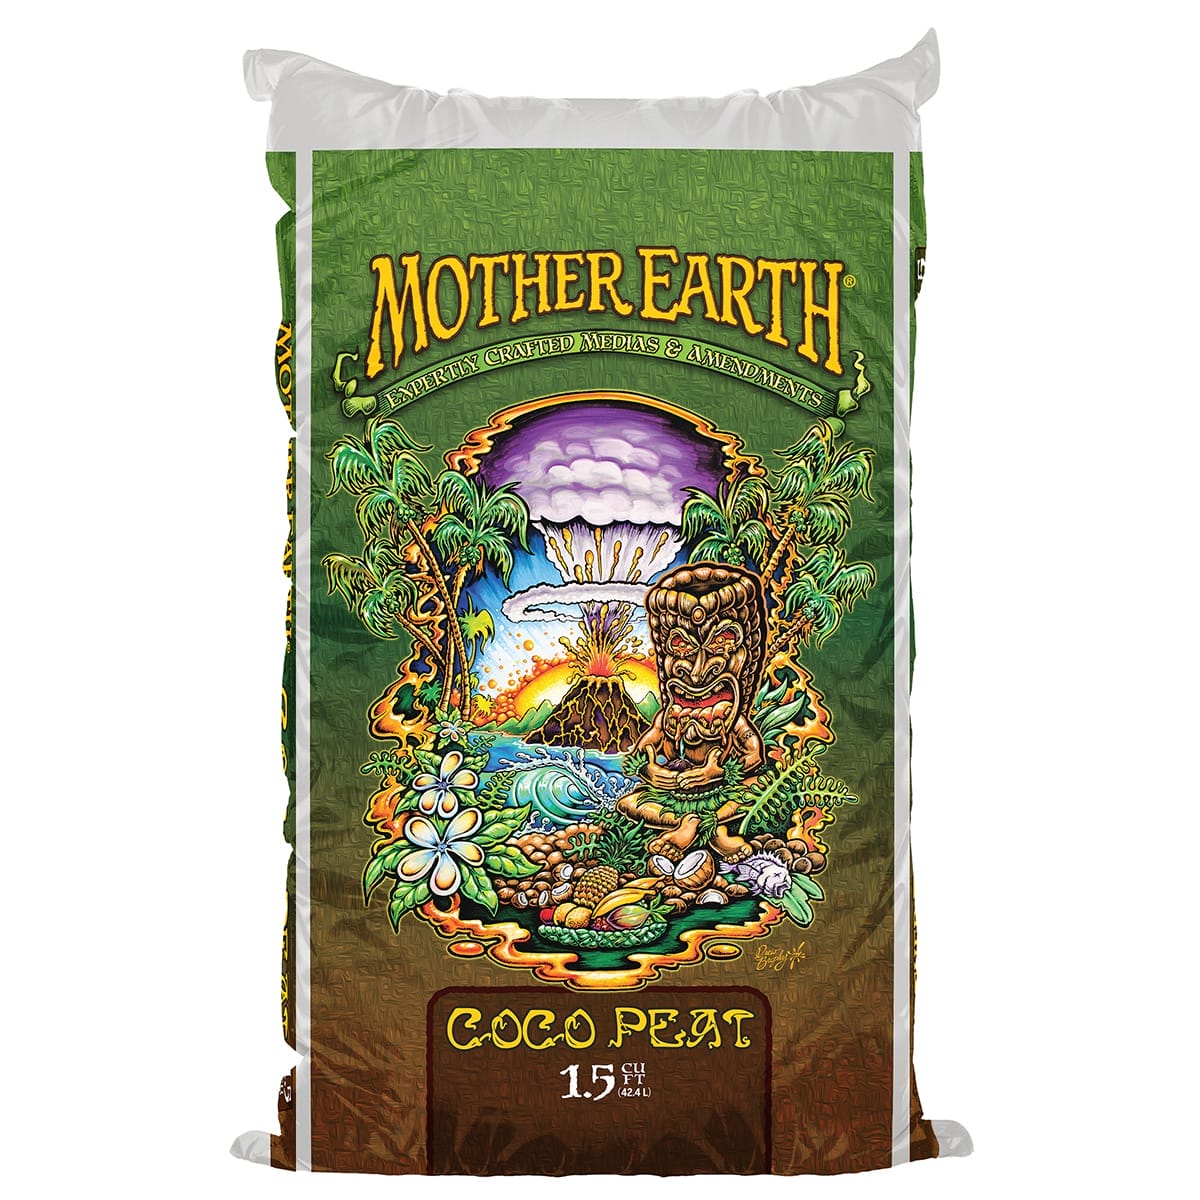 Mother Earth Coco Peat 1.5 Cu Ft